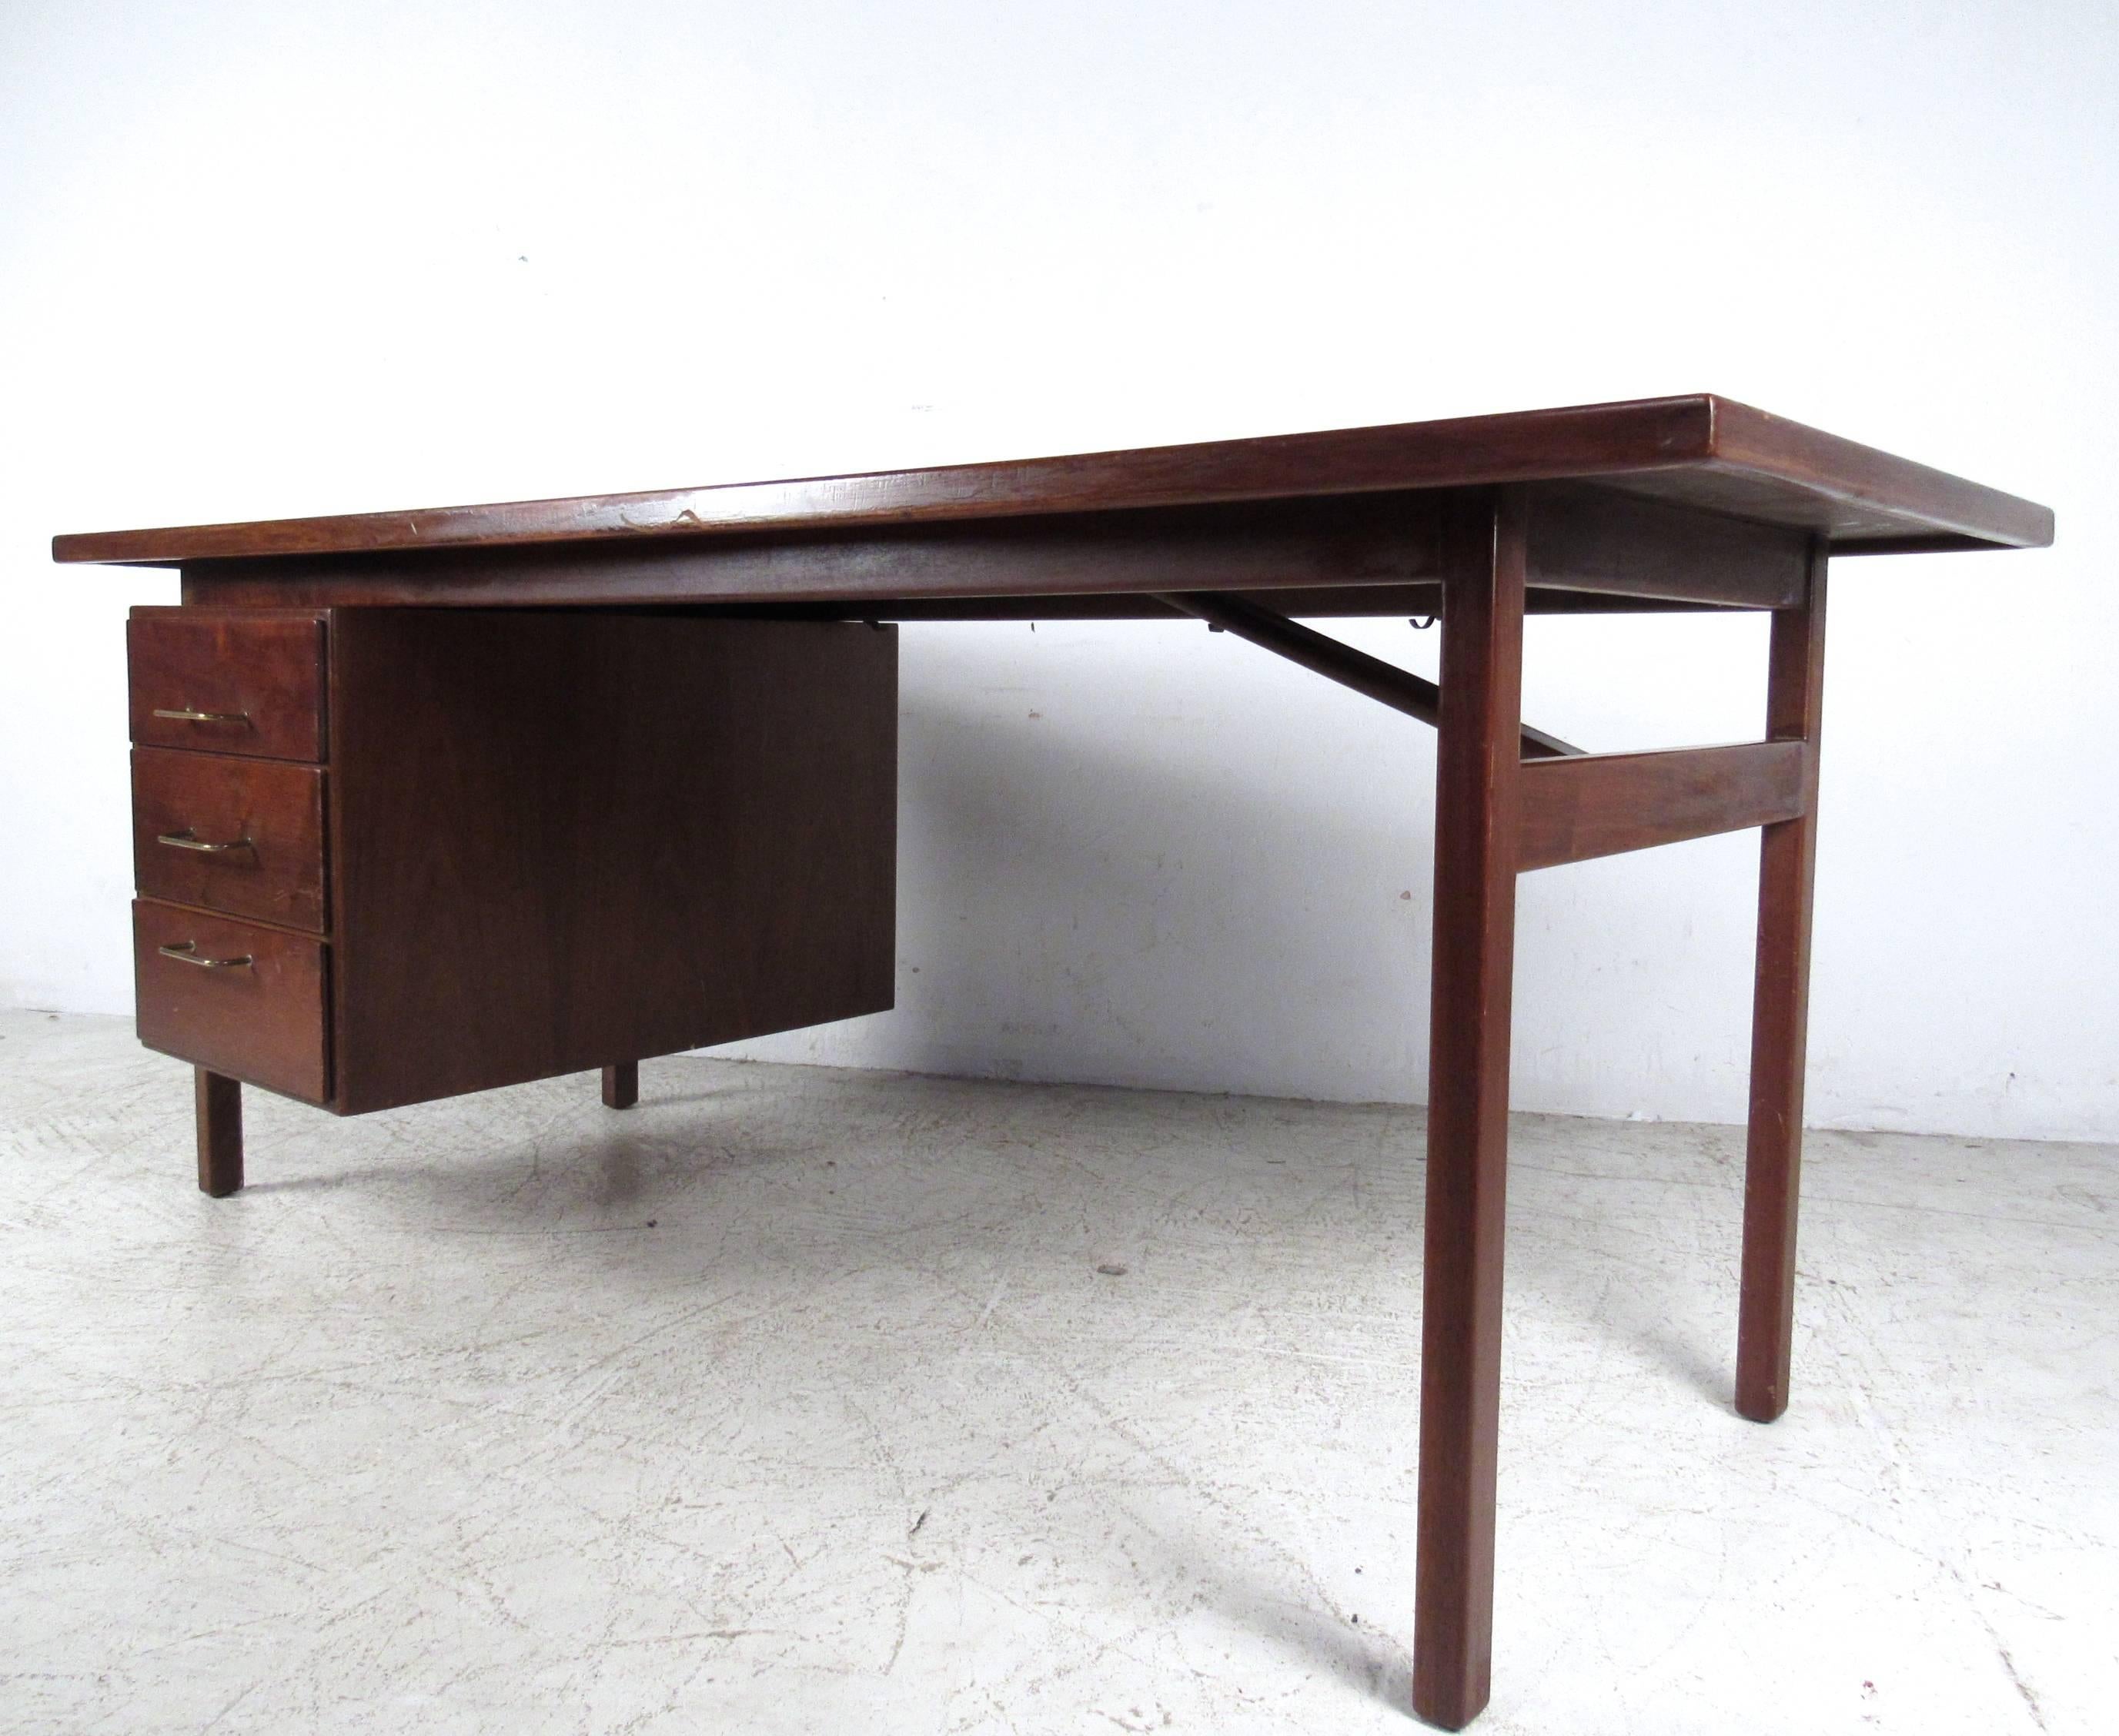 This beautiful vintage writing desk makes a stylish yet simplistic workspace for any interior. With three drawers for storage and added stretchers for support the unique shape of the piece provides ample desk space for home or business. Please